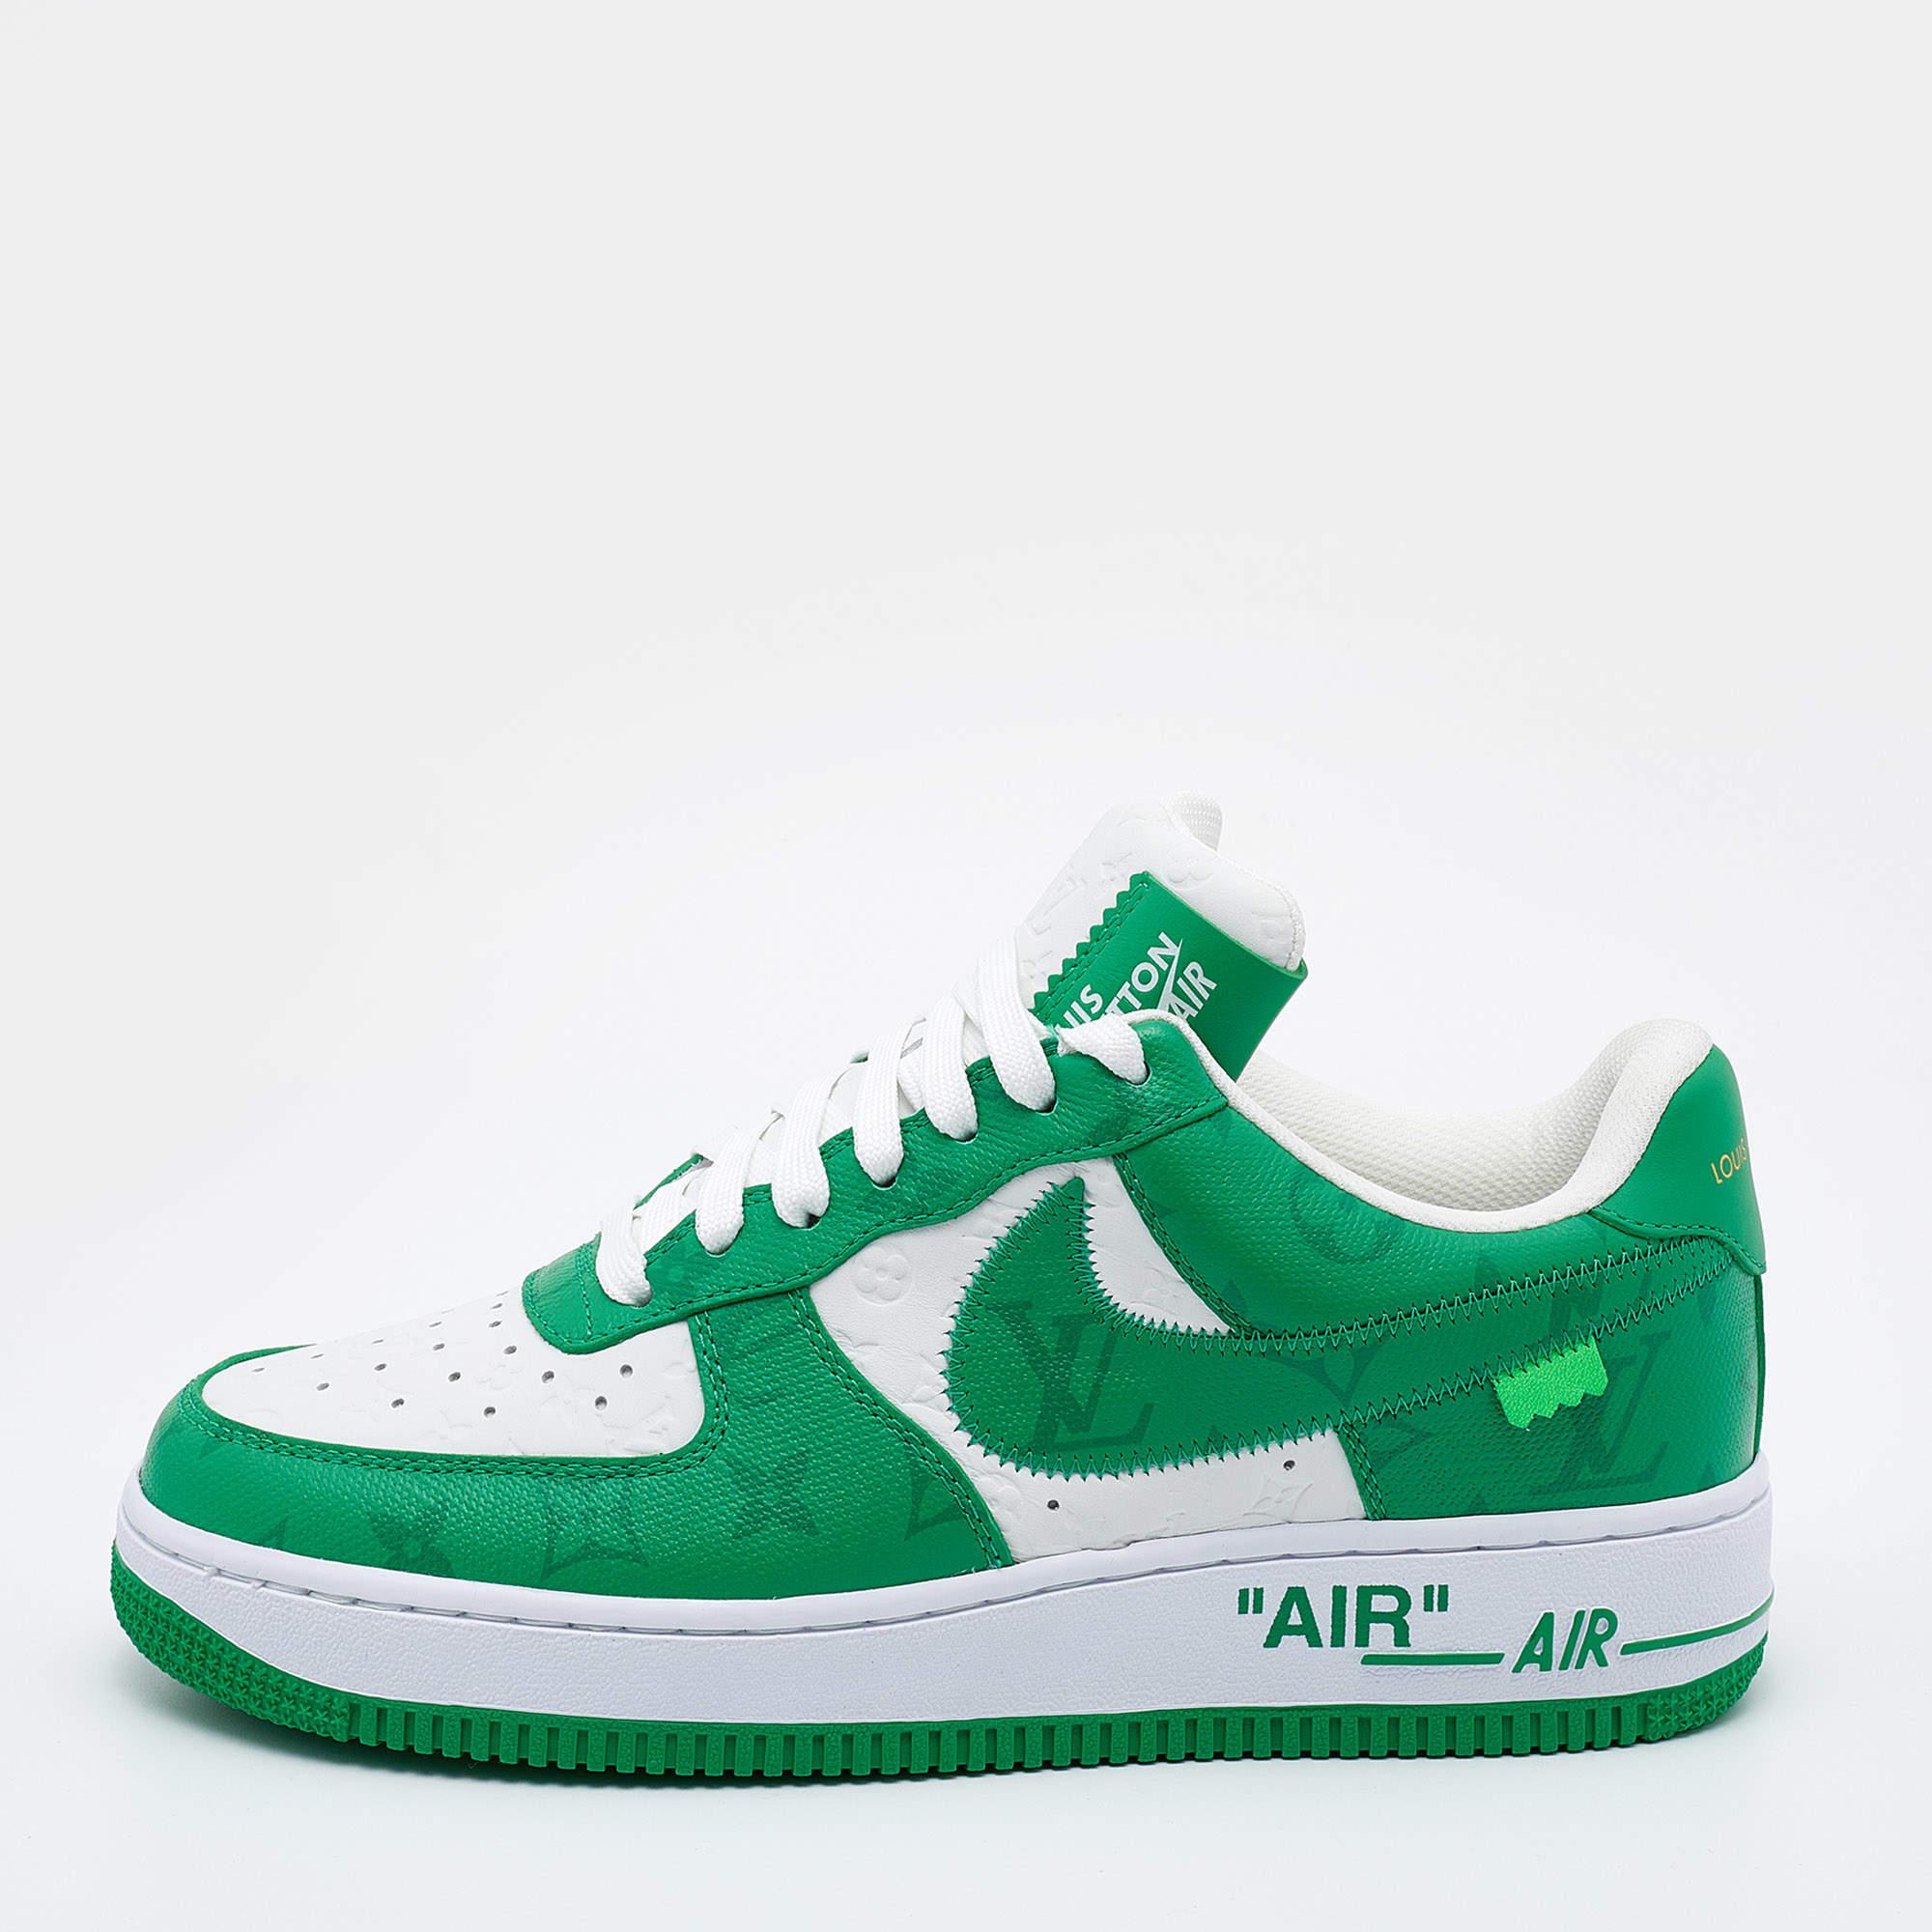 These Nike Air Force 1 sneakers by Louis Vuitton X Nike By Virgil Abloh are super sturdy, stunning, and stylish. They are crafted from green-white Monogram-embossed leather into a low-top silhouette. They showcase lace-up fastenings and brand